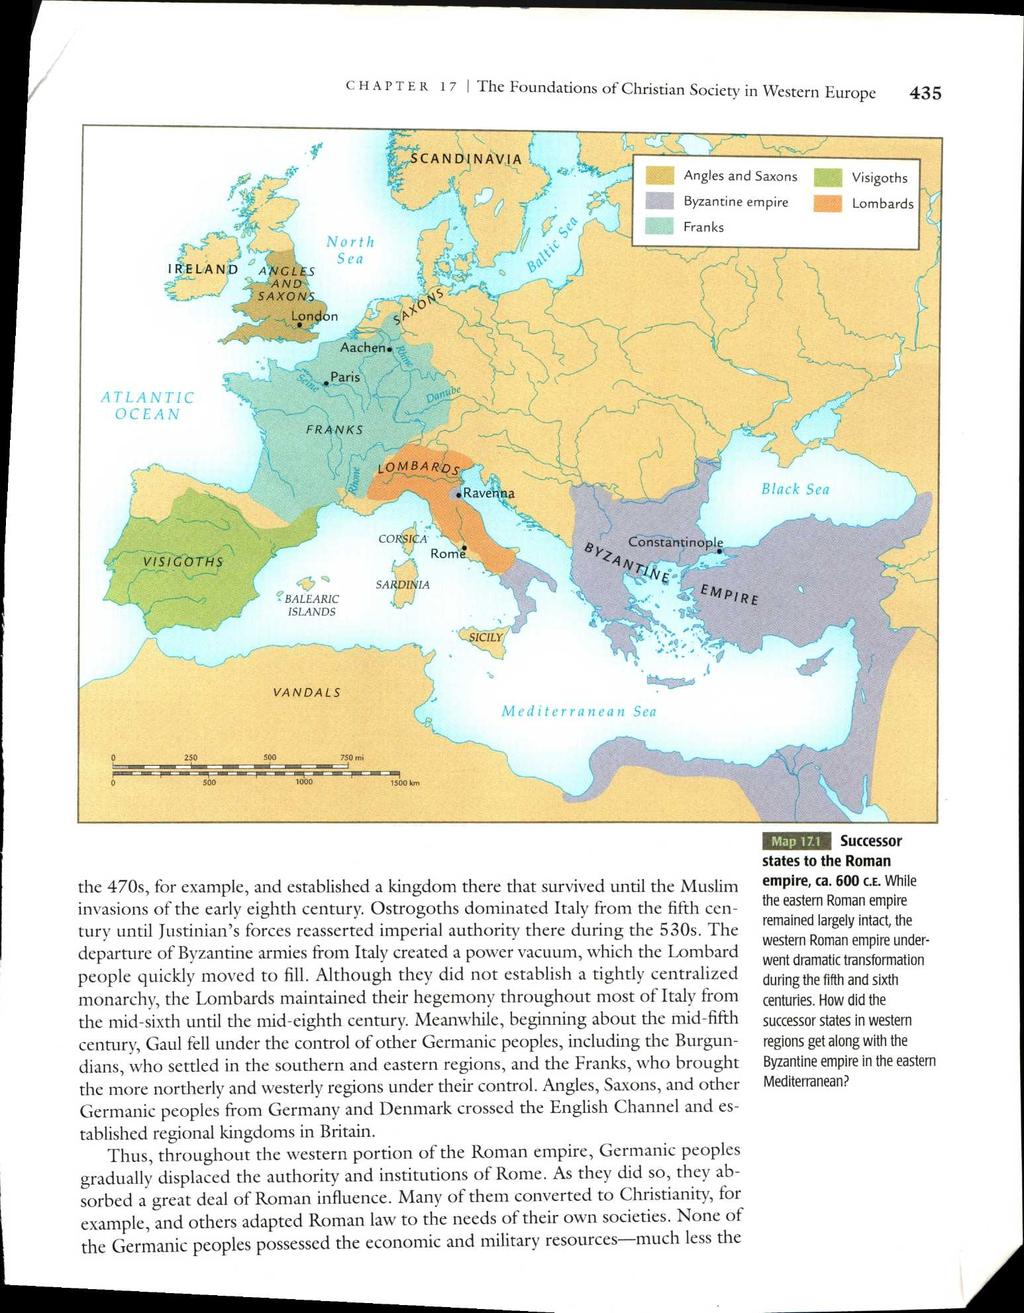 CHAPTER 17 I The Foundations of Christian Society in Western Europe 435 Y. Angles and Saxons Byzantine empire Franks Visigoths 11111 Lombards IRELAND ANGLES AND SAXONS London Aachen. *0 1.